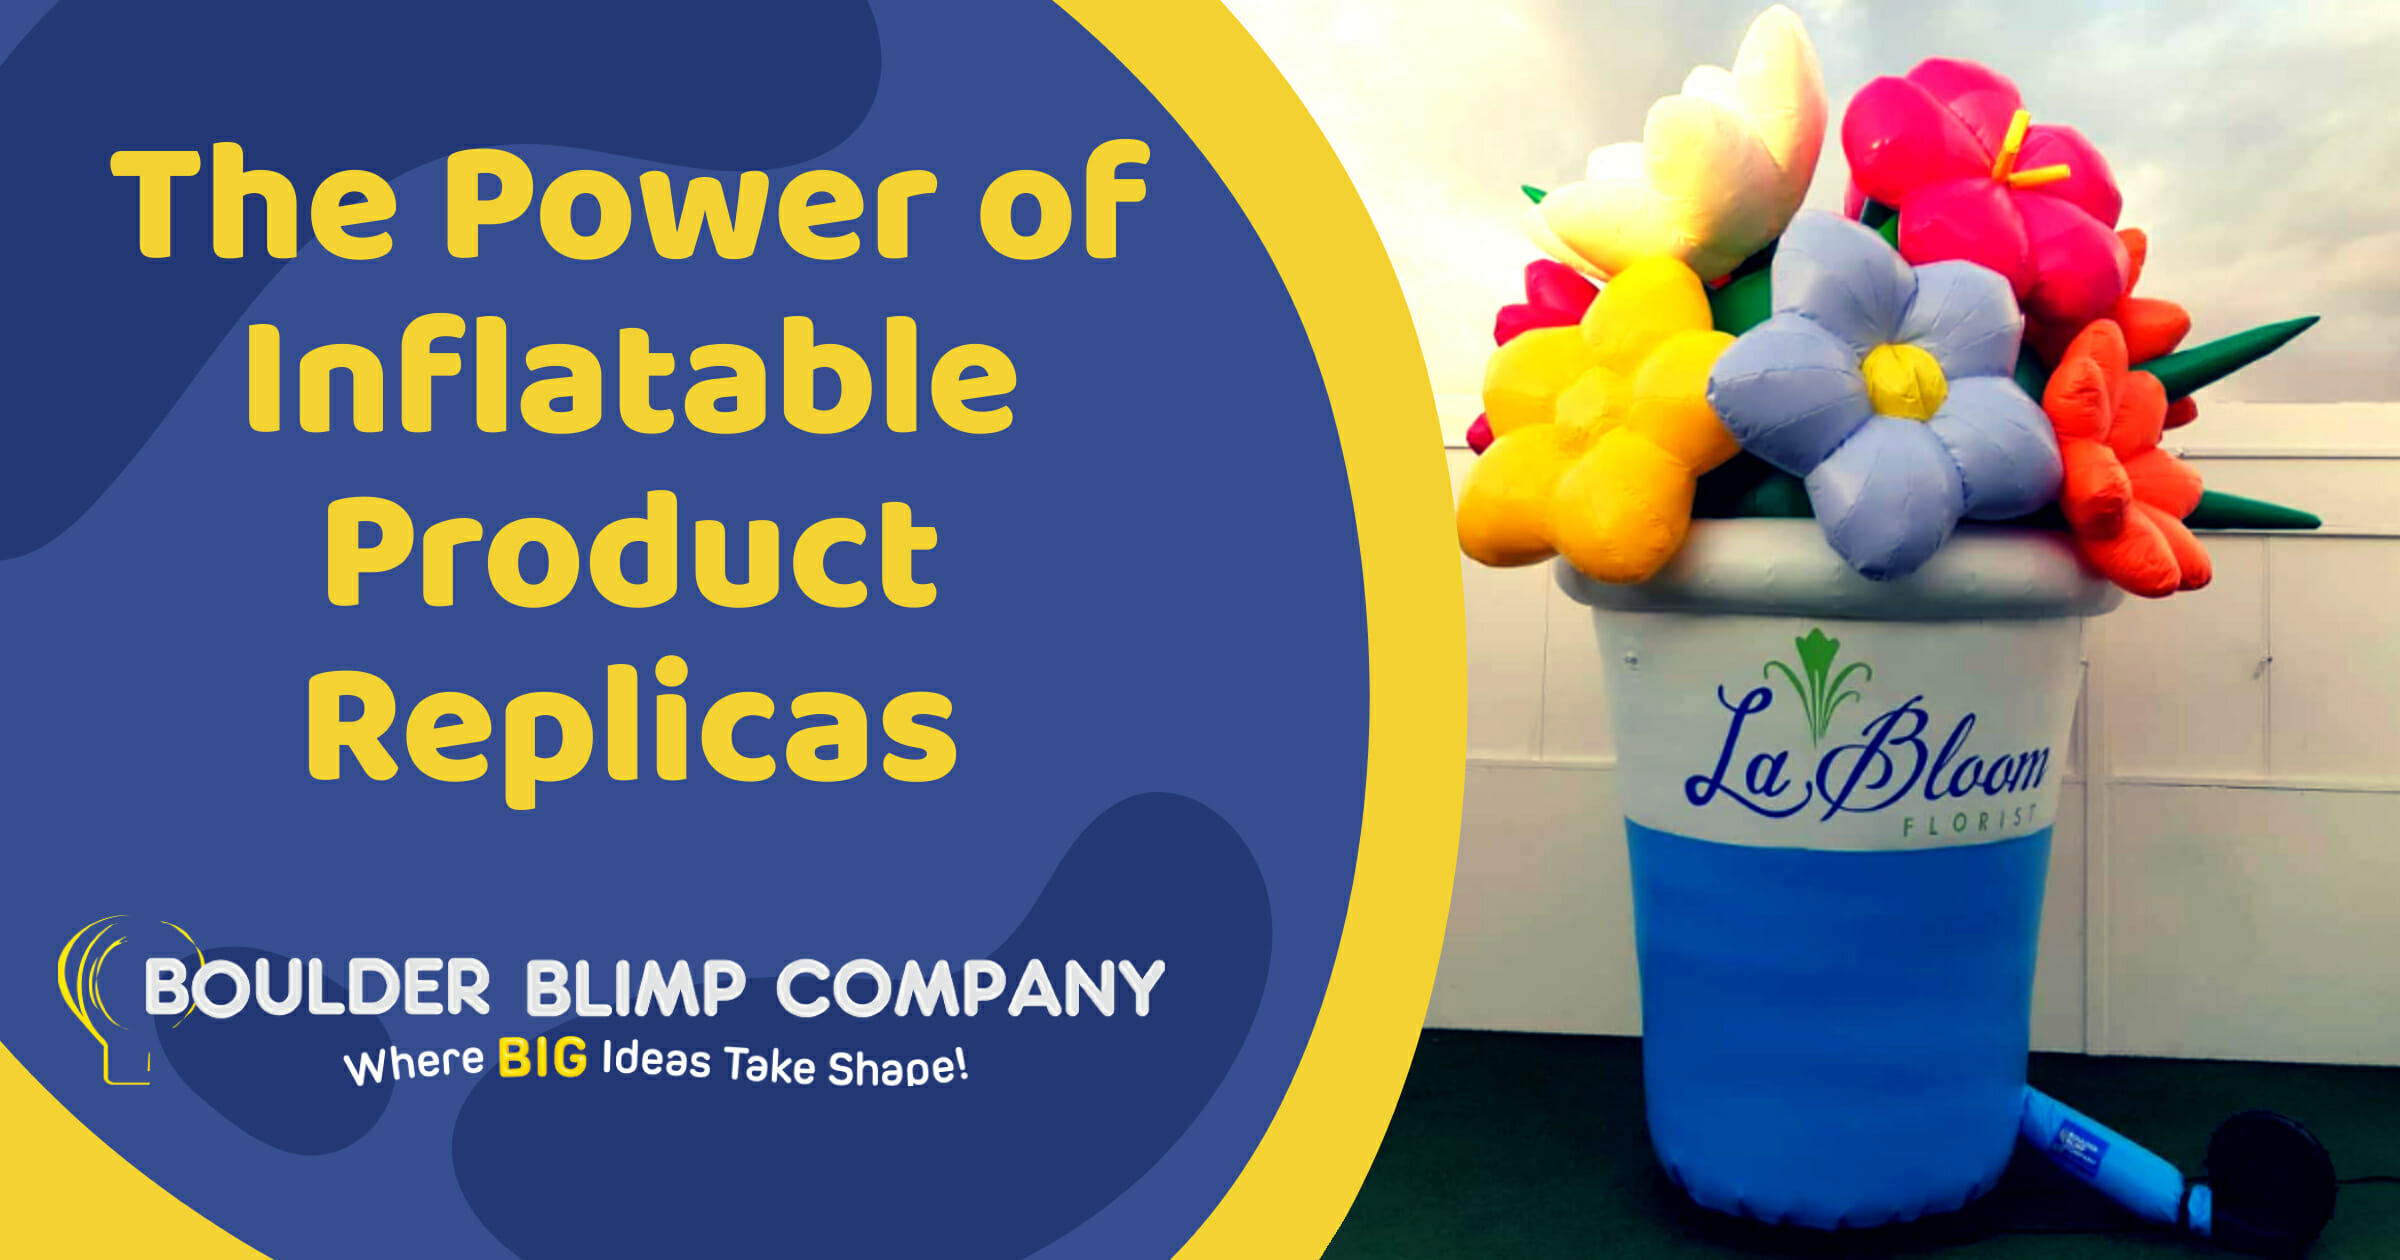 The Power of Inflatable Product Replicas